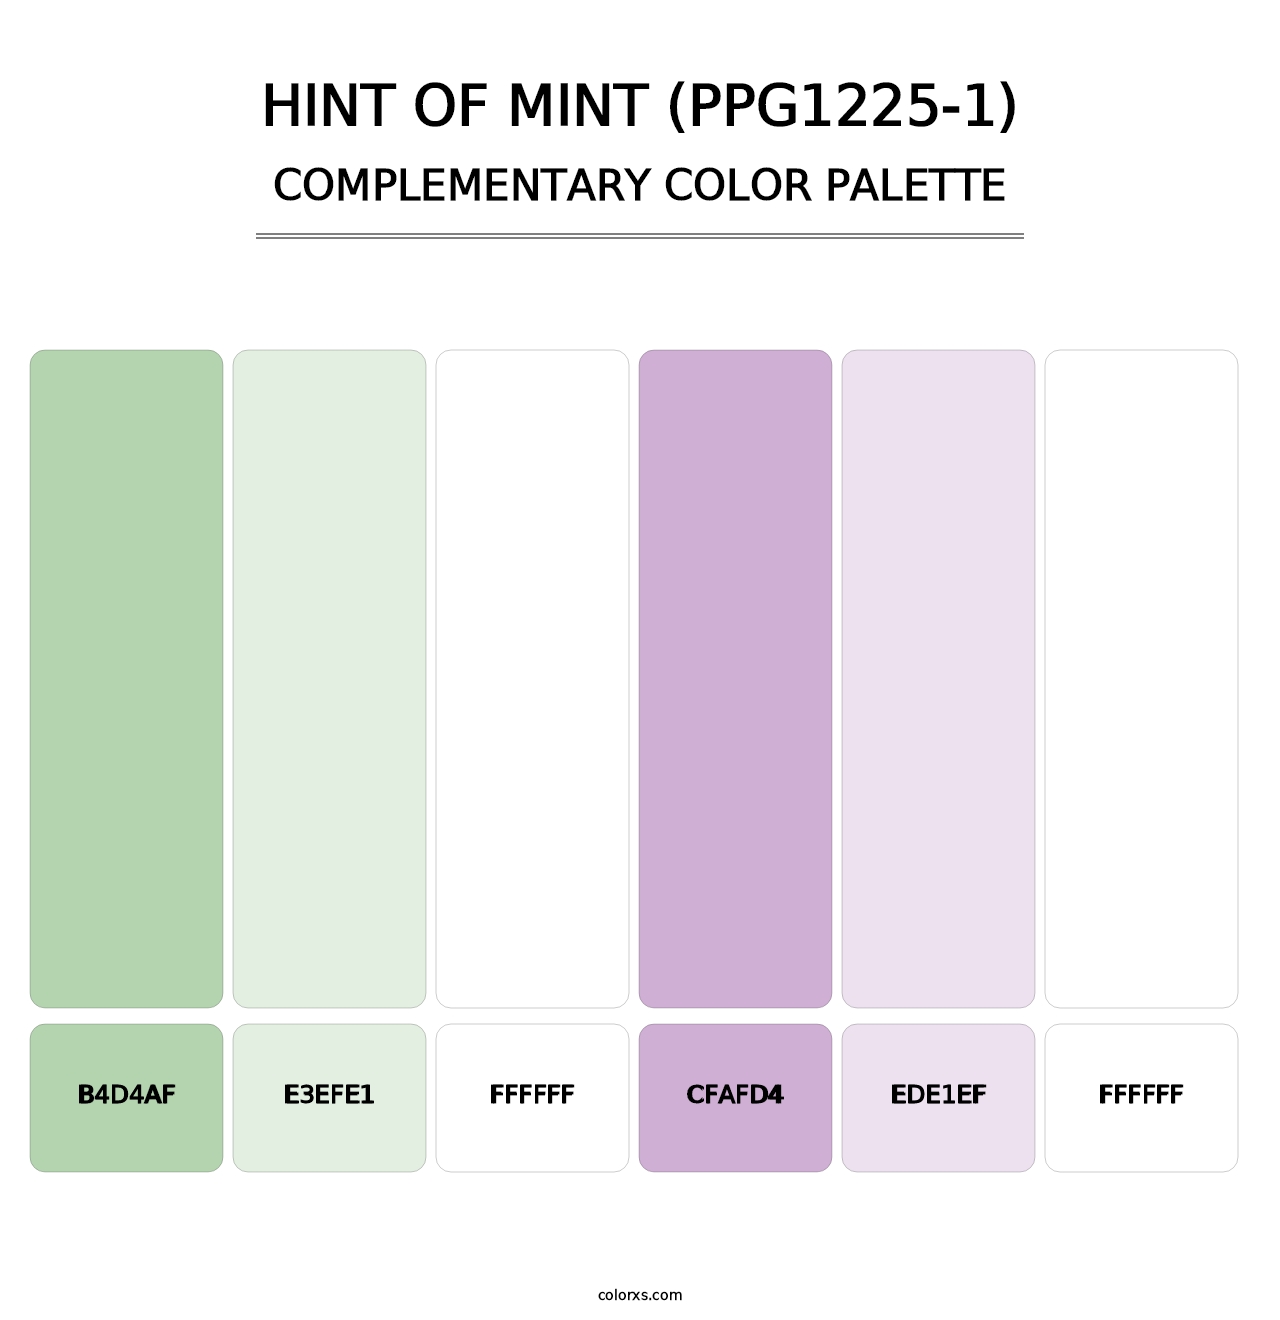 Hint Of Mint (PPG1225-1) - Complementary Color Palette